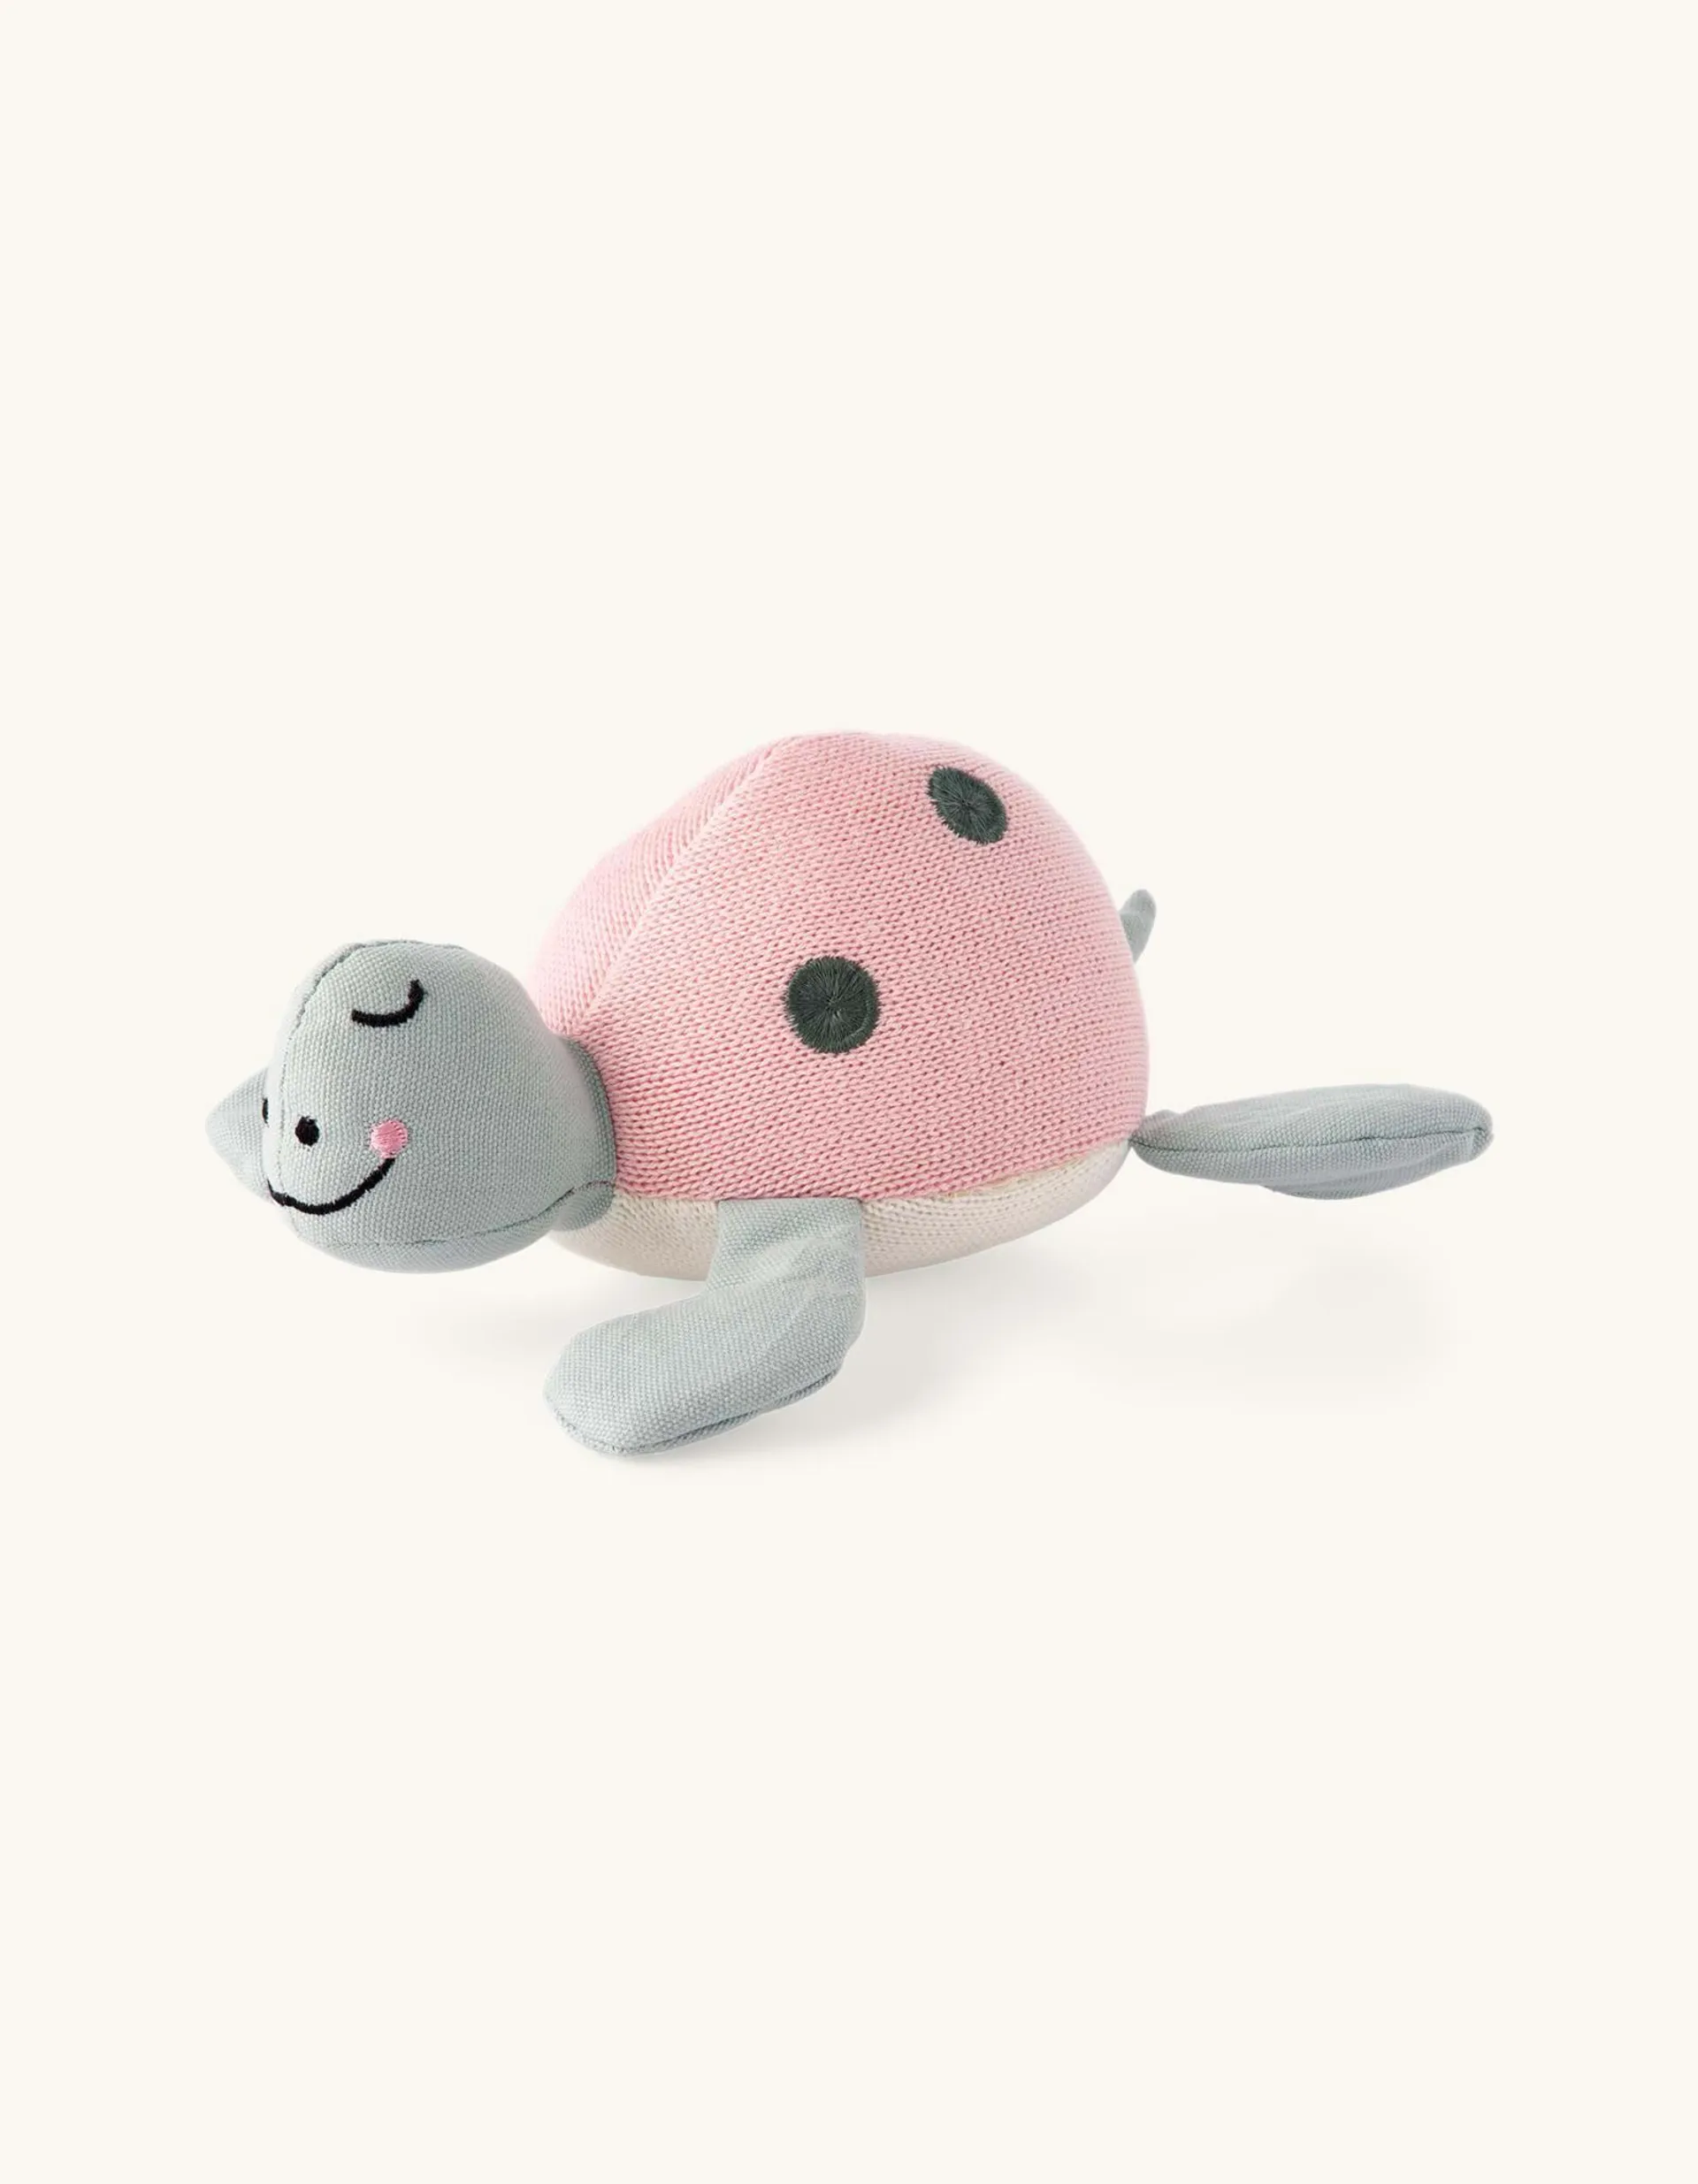 Soft toy turtle Organic cotton/polyester. 21 cm.